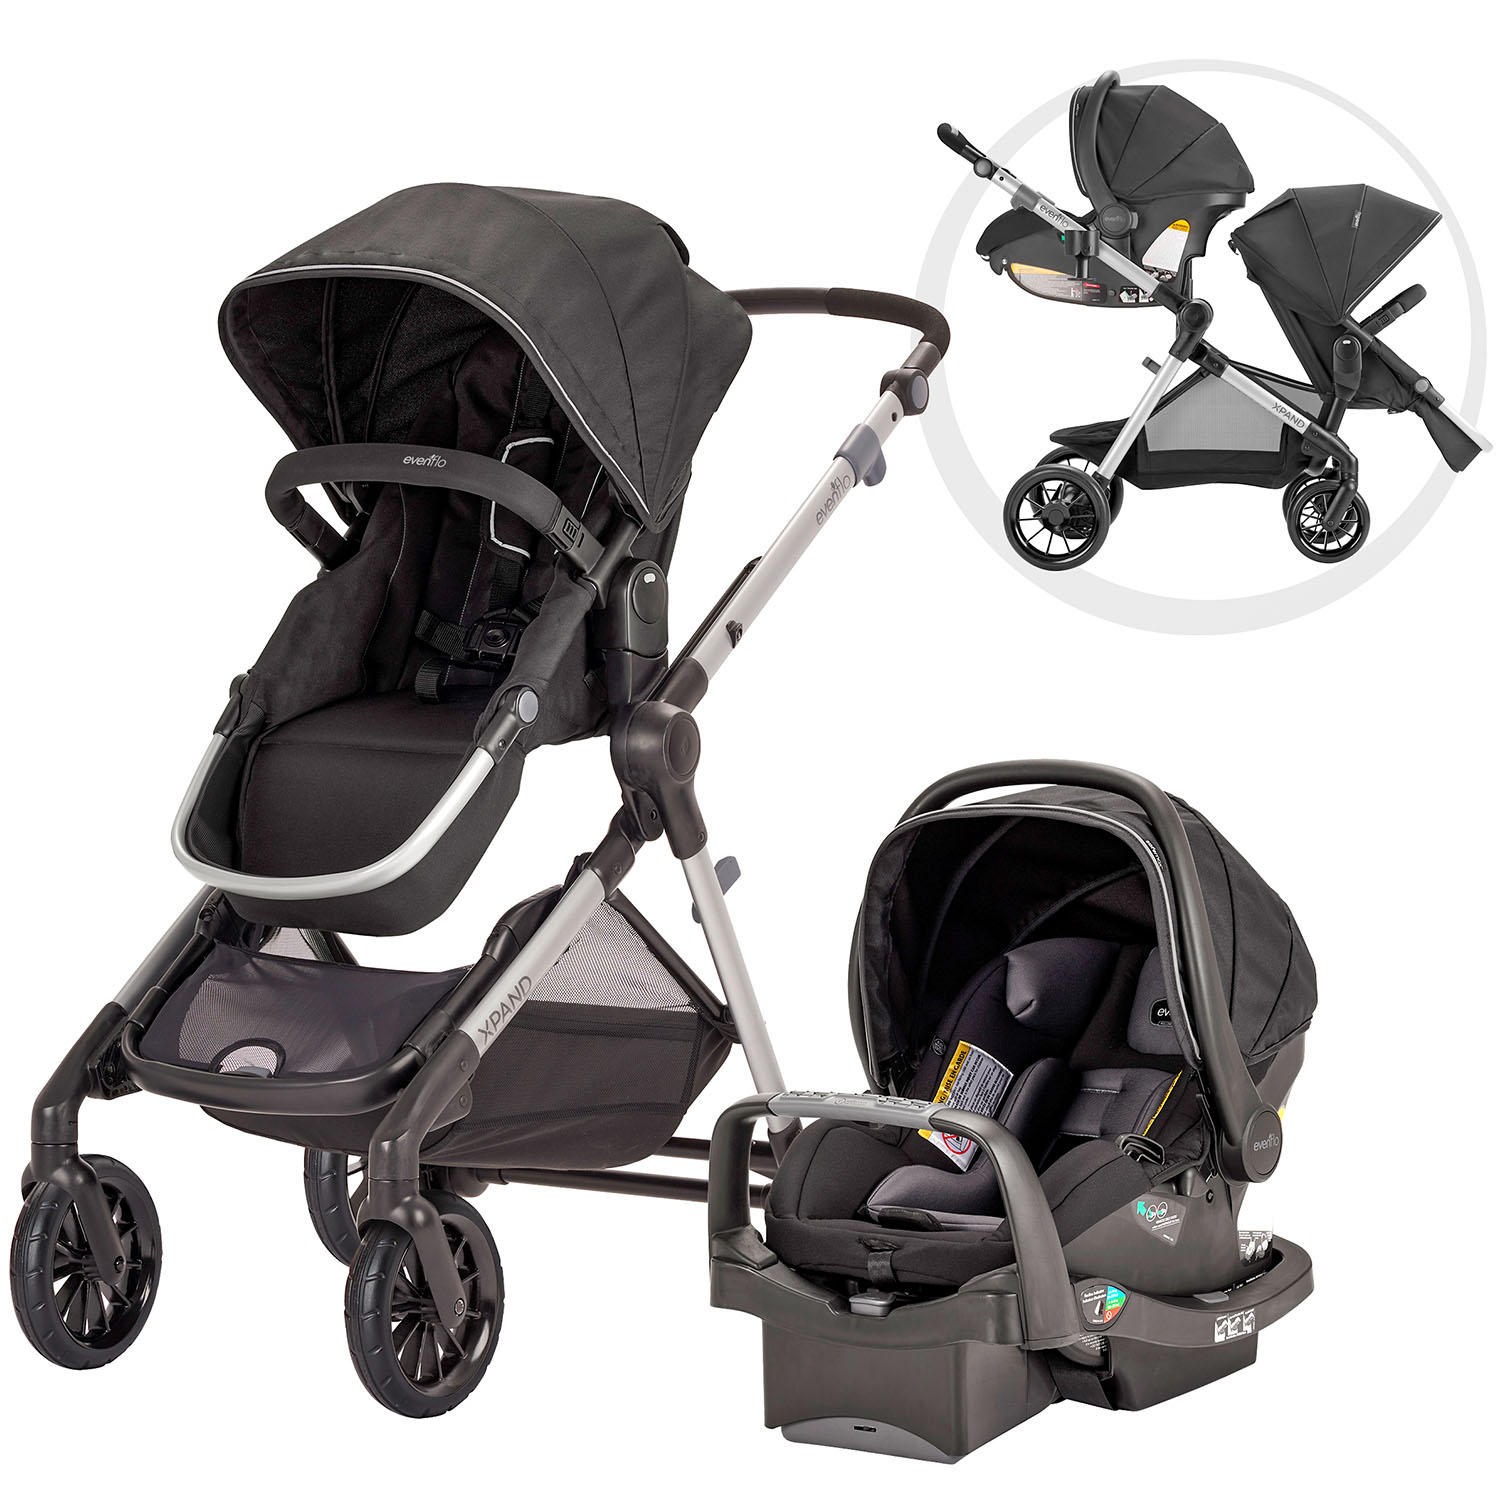 Evenflo Pivot Xpand Travel System with SafeMax Infant Car Seat